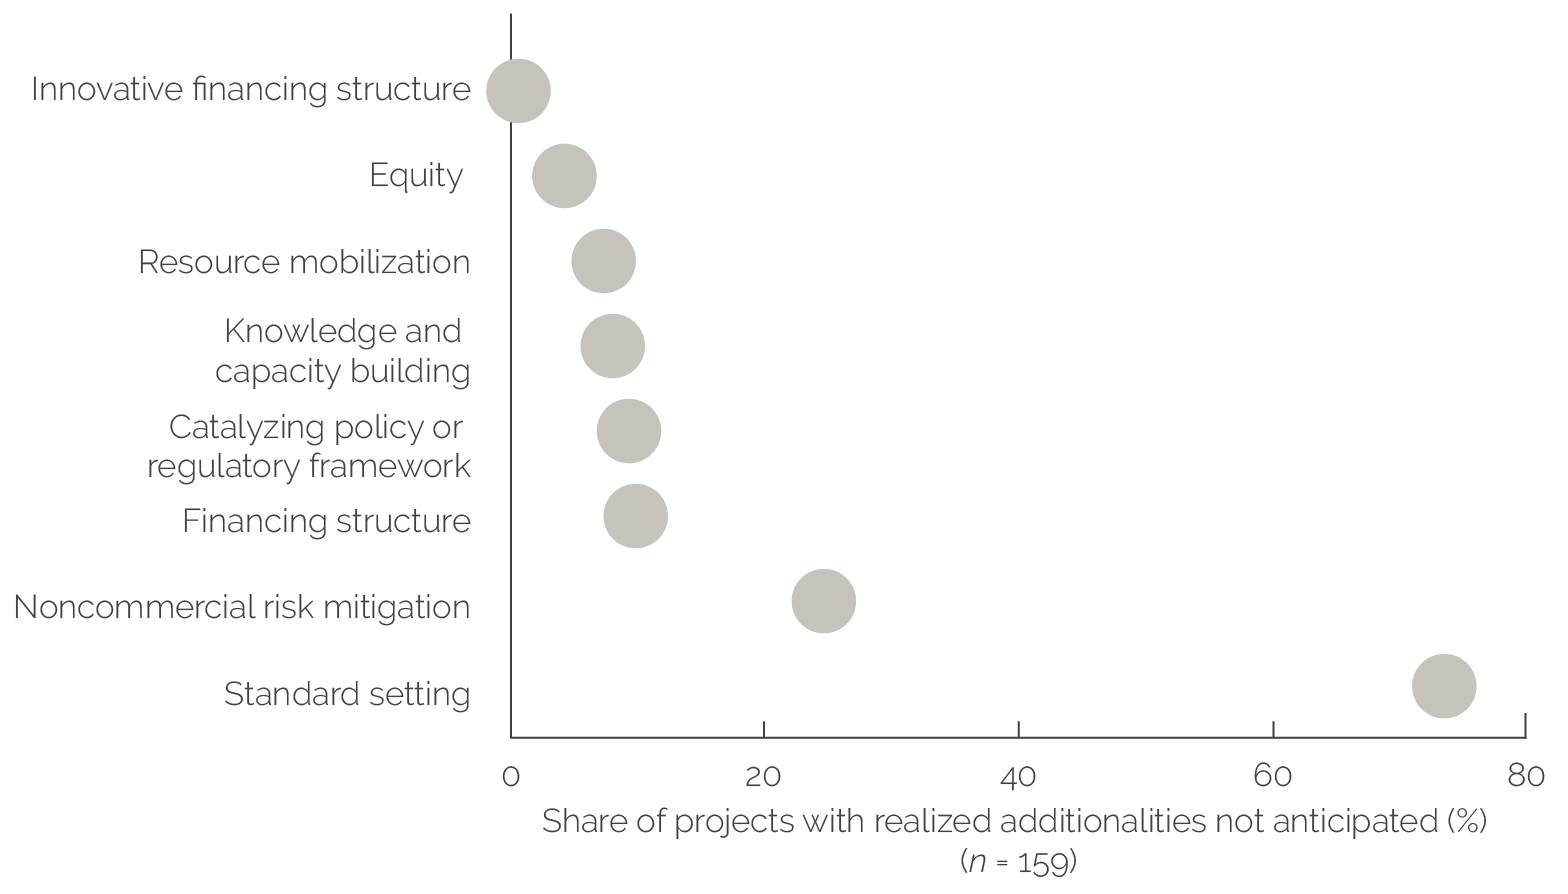 Plot showing noncommercial risk mitigation and standard setting were realized in many projects that did not anticipate them.